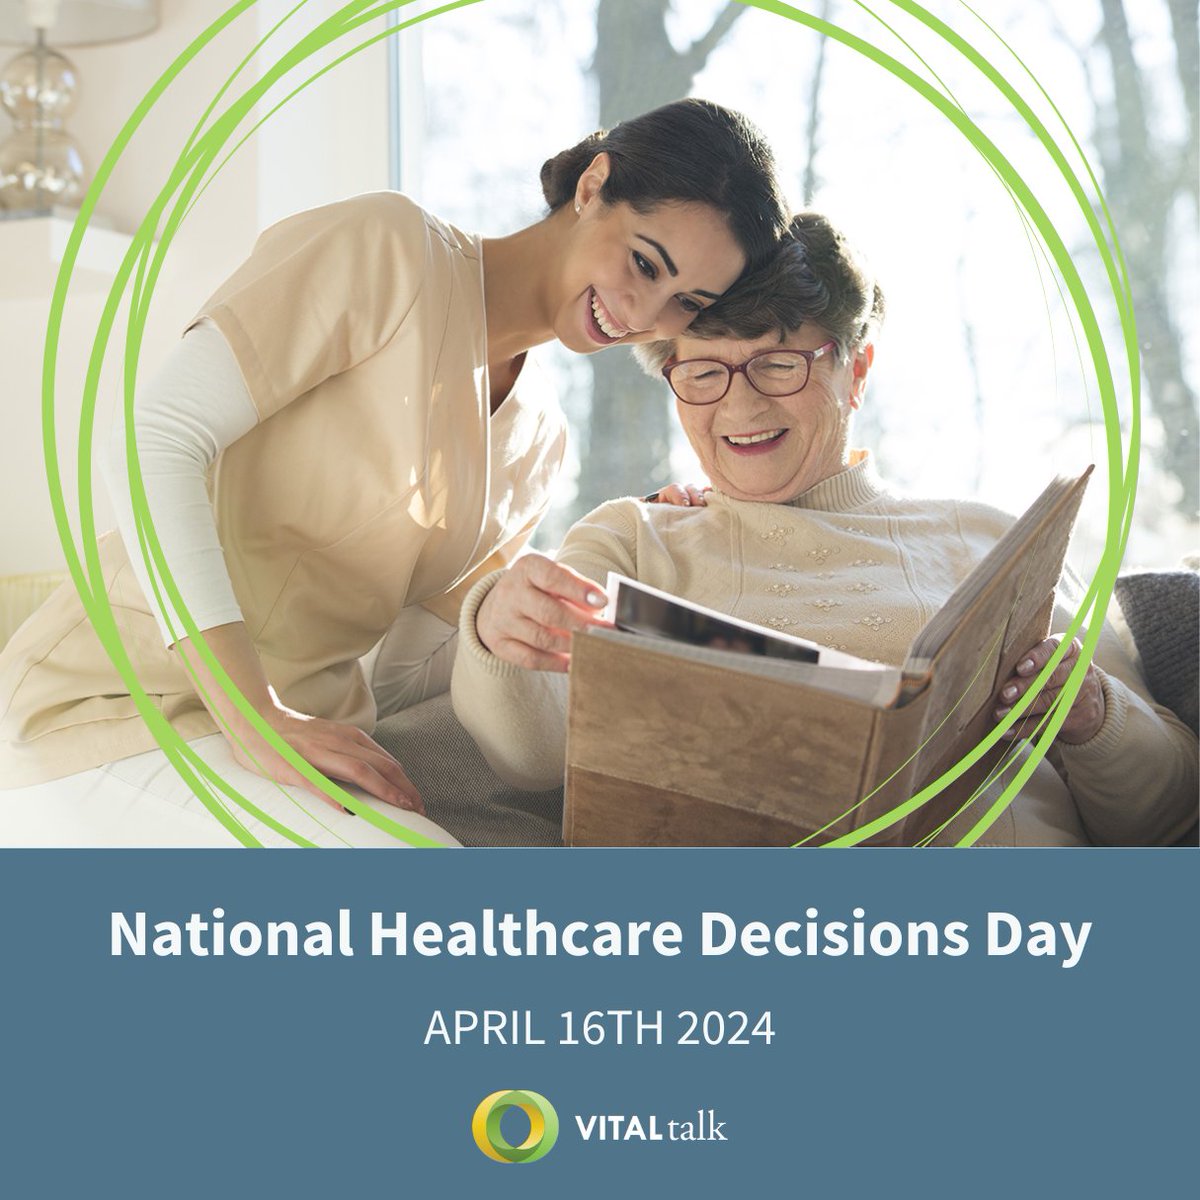 Let your voice be heard! Take charge of your healthcare decisions and start the conversation about advanced care planning. With National Healthcare Decisions Day just around the corner, there's no better time to ensure your wishes are known and respected. #NHDD @NHDD